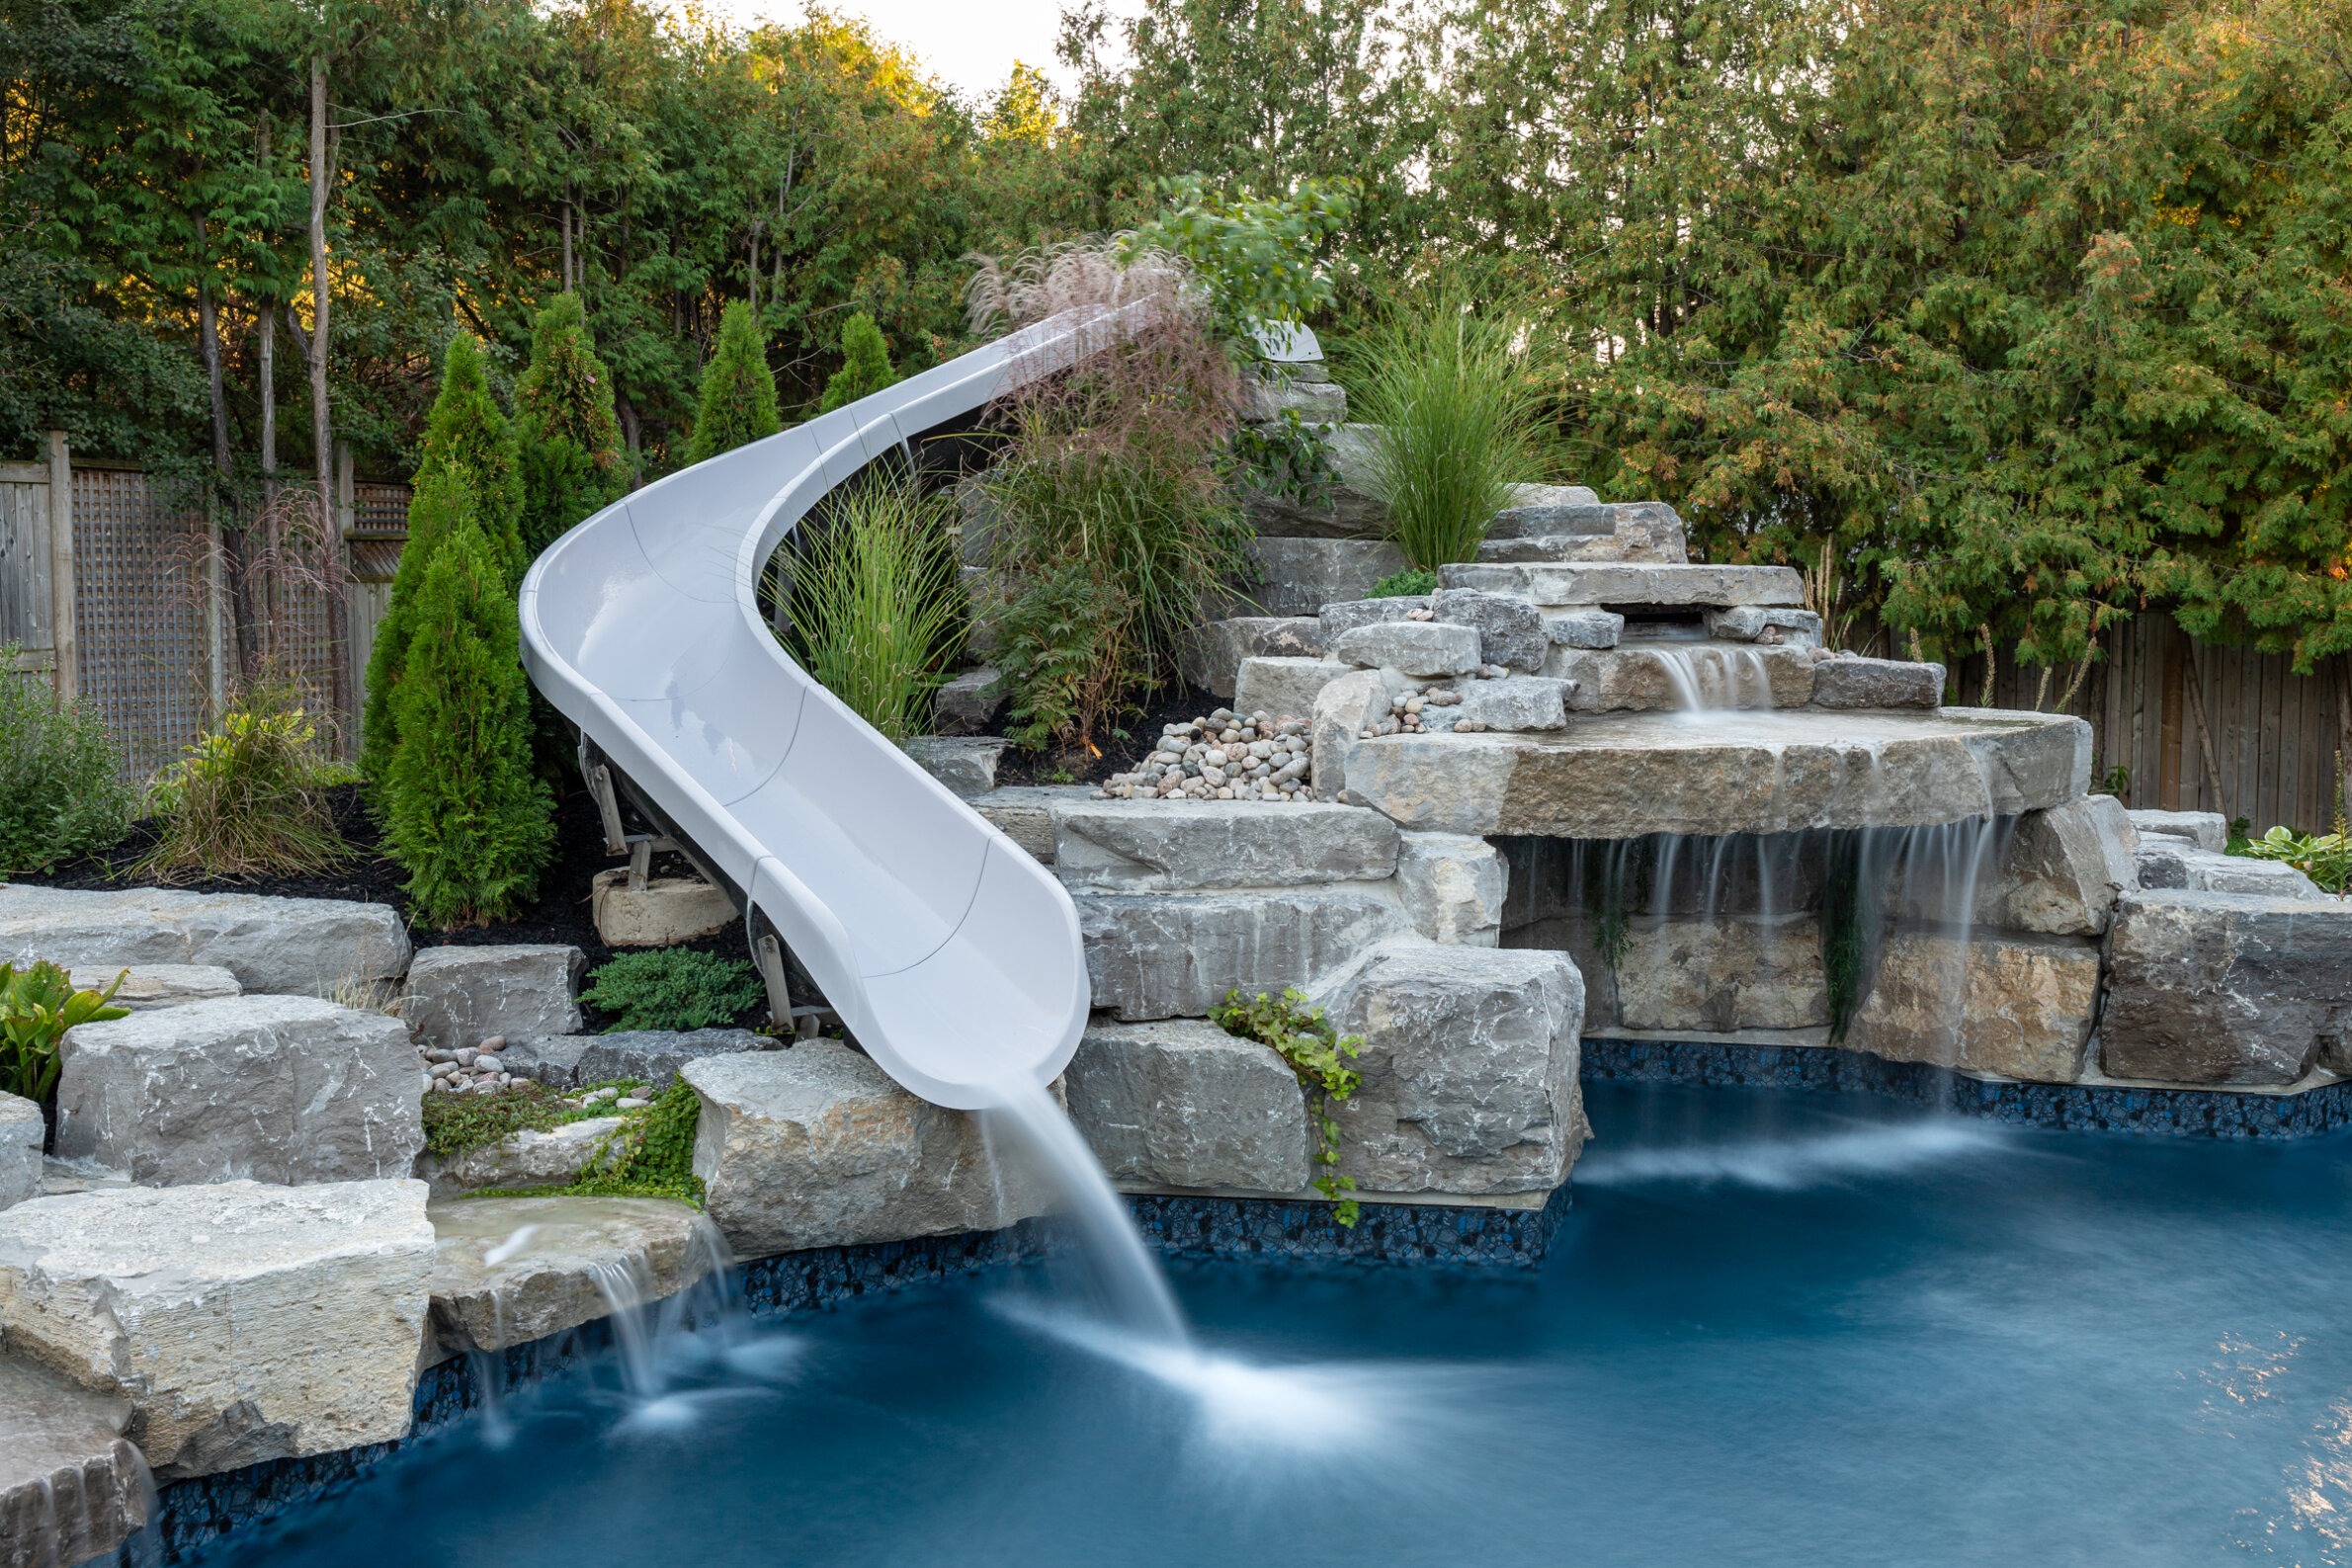 This image features a residential backyard with a pool, a curved water slide, a rock waterfall, landscaped plants, and a wooden fence.